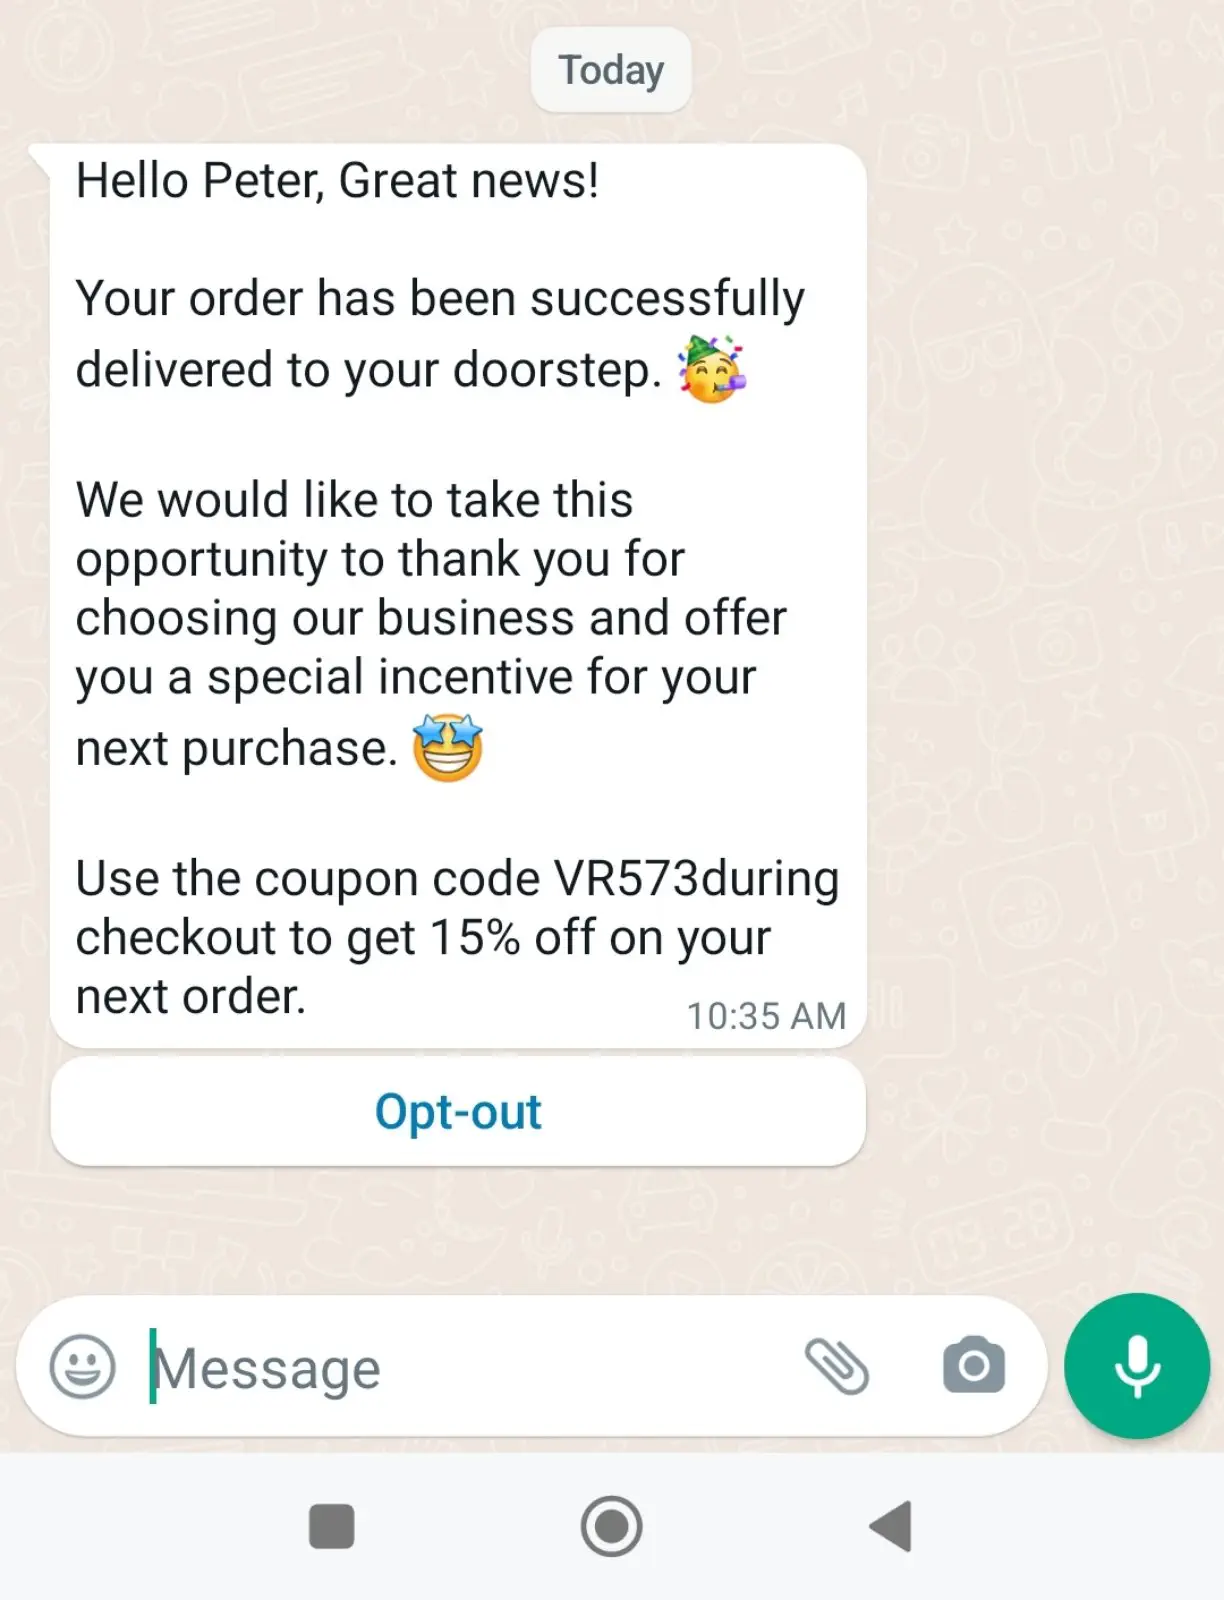 WhatsApp message with an Order delivered update